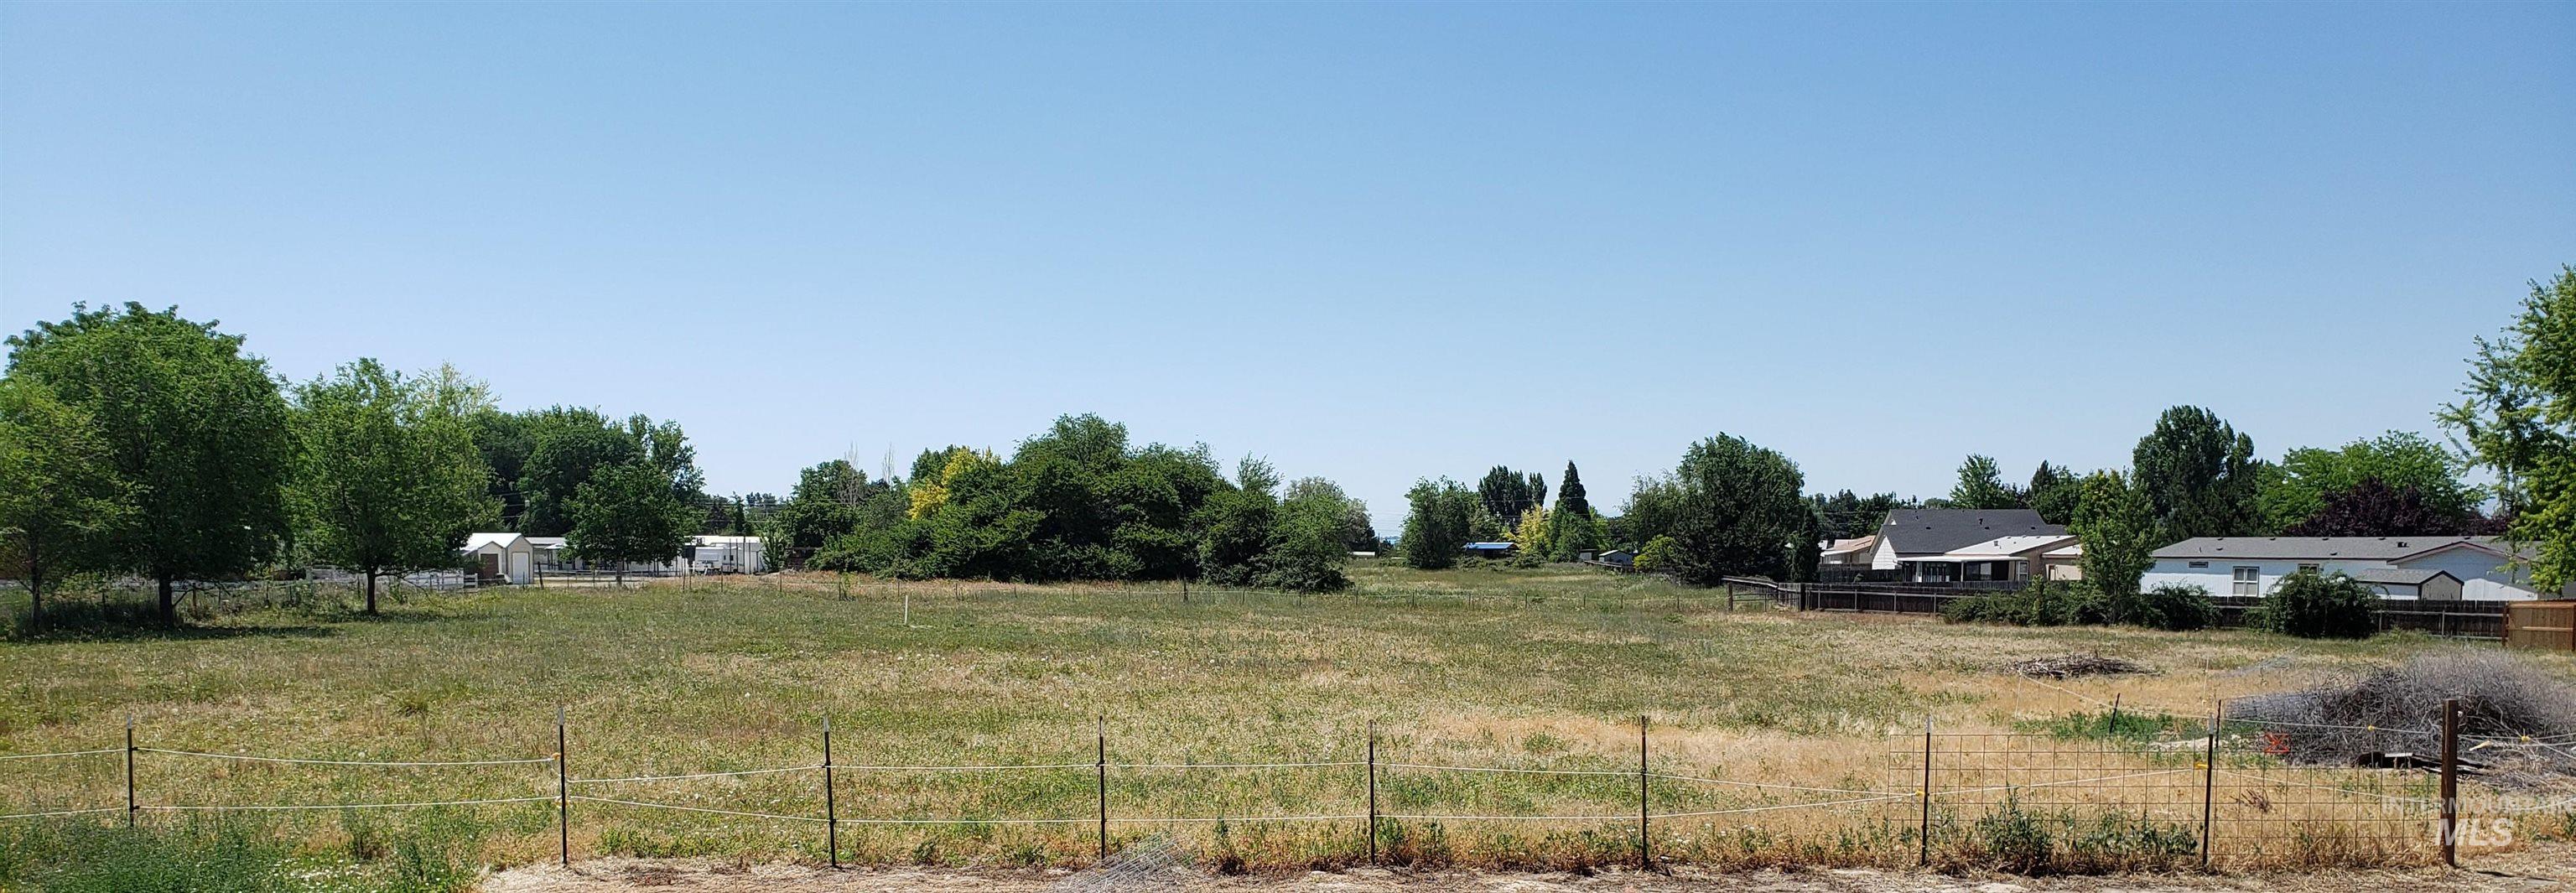 TBD Moss Lane, Nampa, Idaho 83651, Business/Commercial For Sale, Price $1,135,700,MLS 98908521